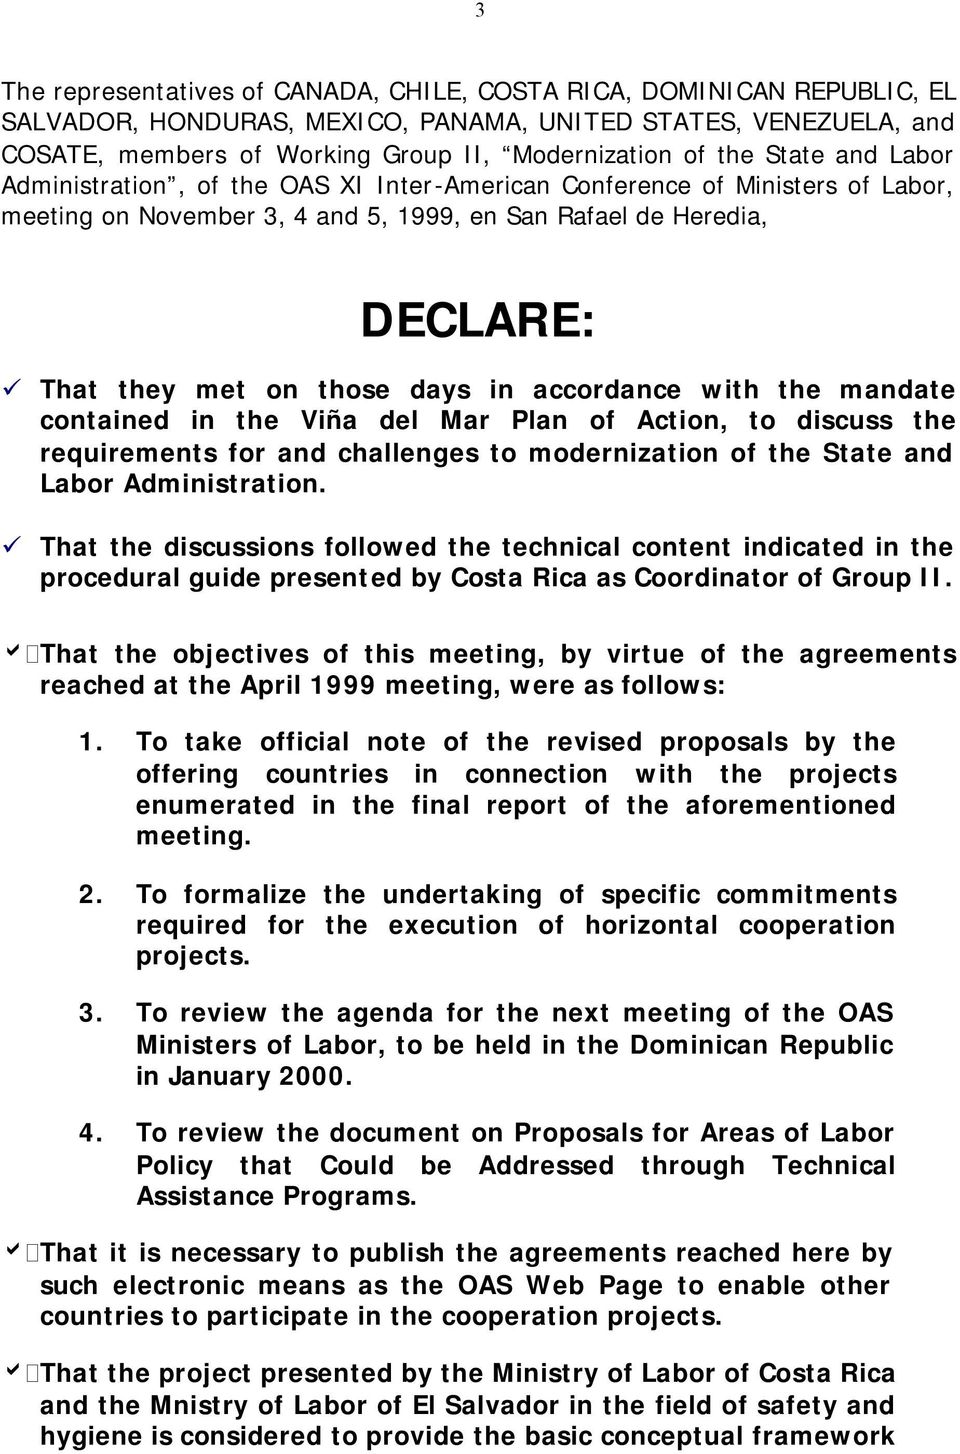 accordance with the mandate contained in the Viña del Mar Plan of Action, to discuss the requirements for and challenges to modernization of the State and Labor Administration.